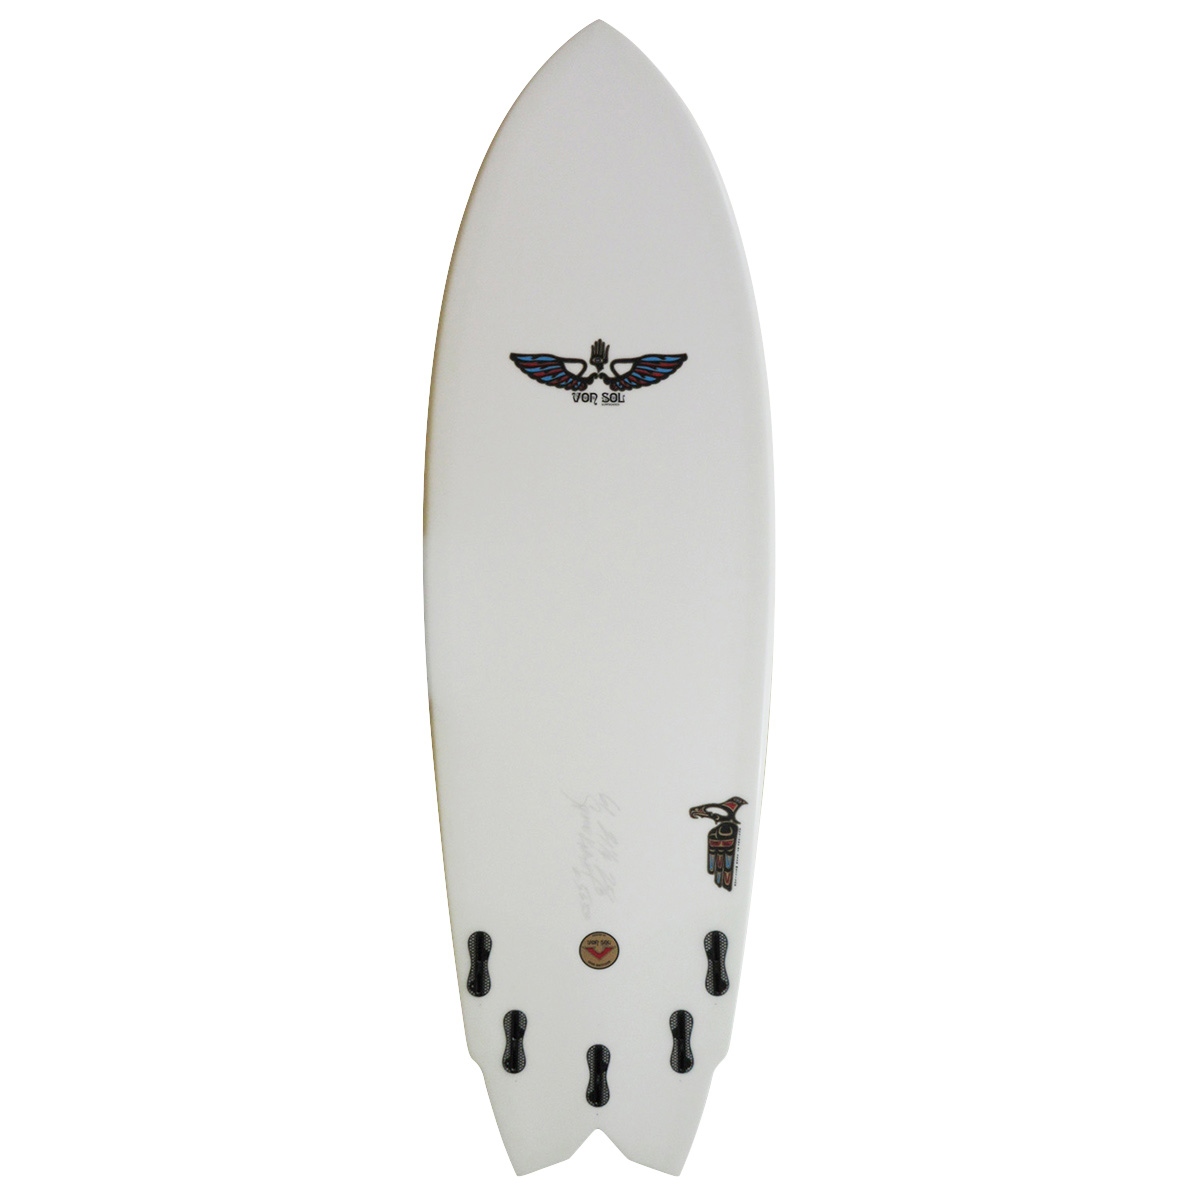 VONSOL SURFBOARDS / SPACE KNIGHT 6`1 HD EPS